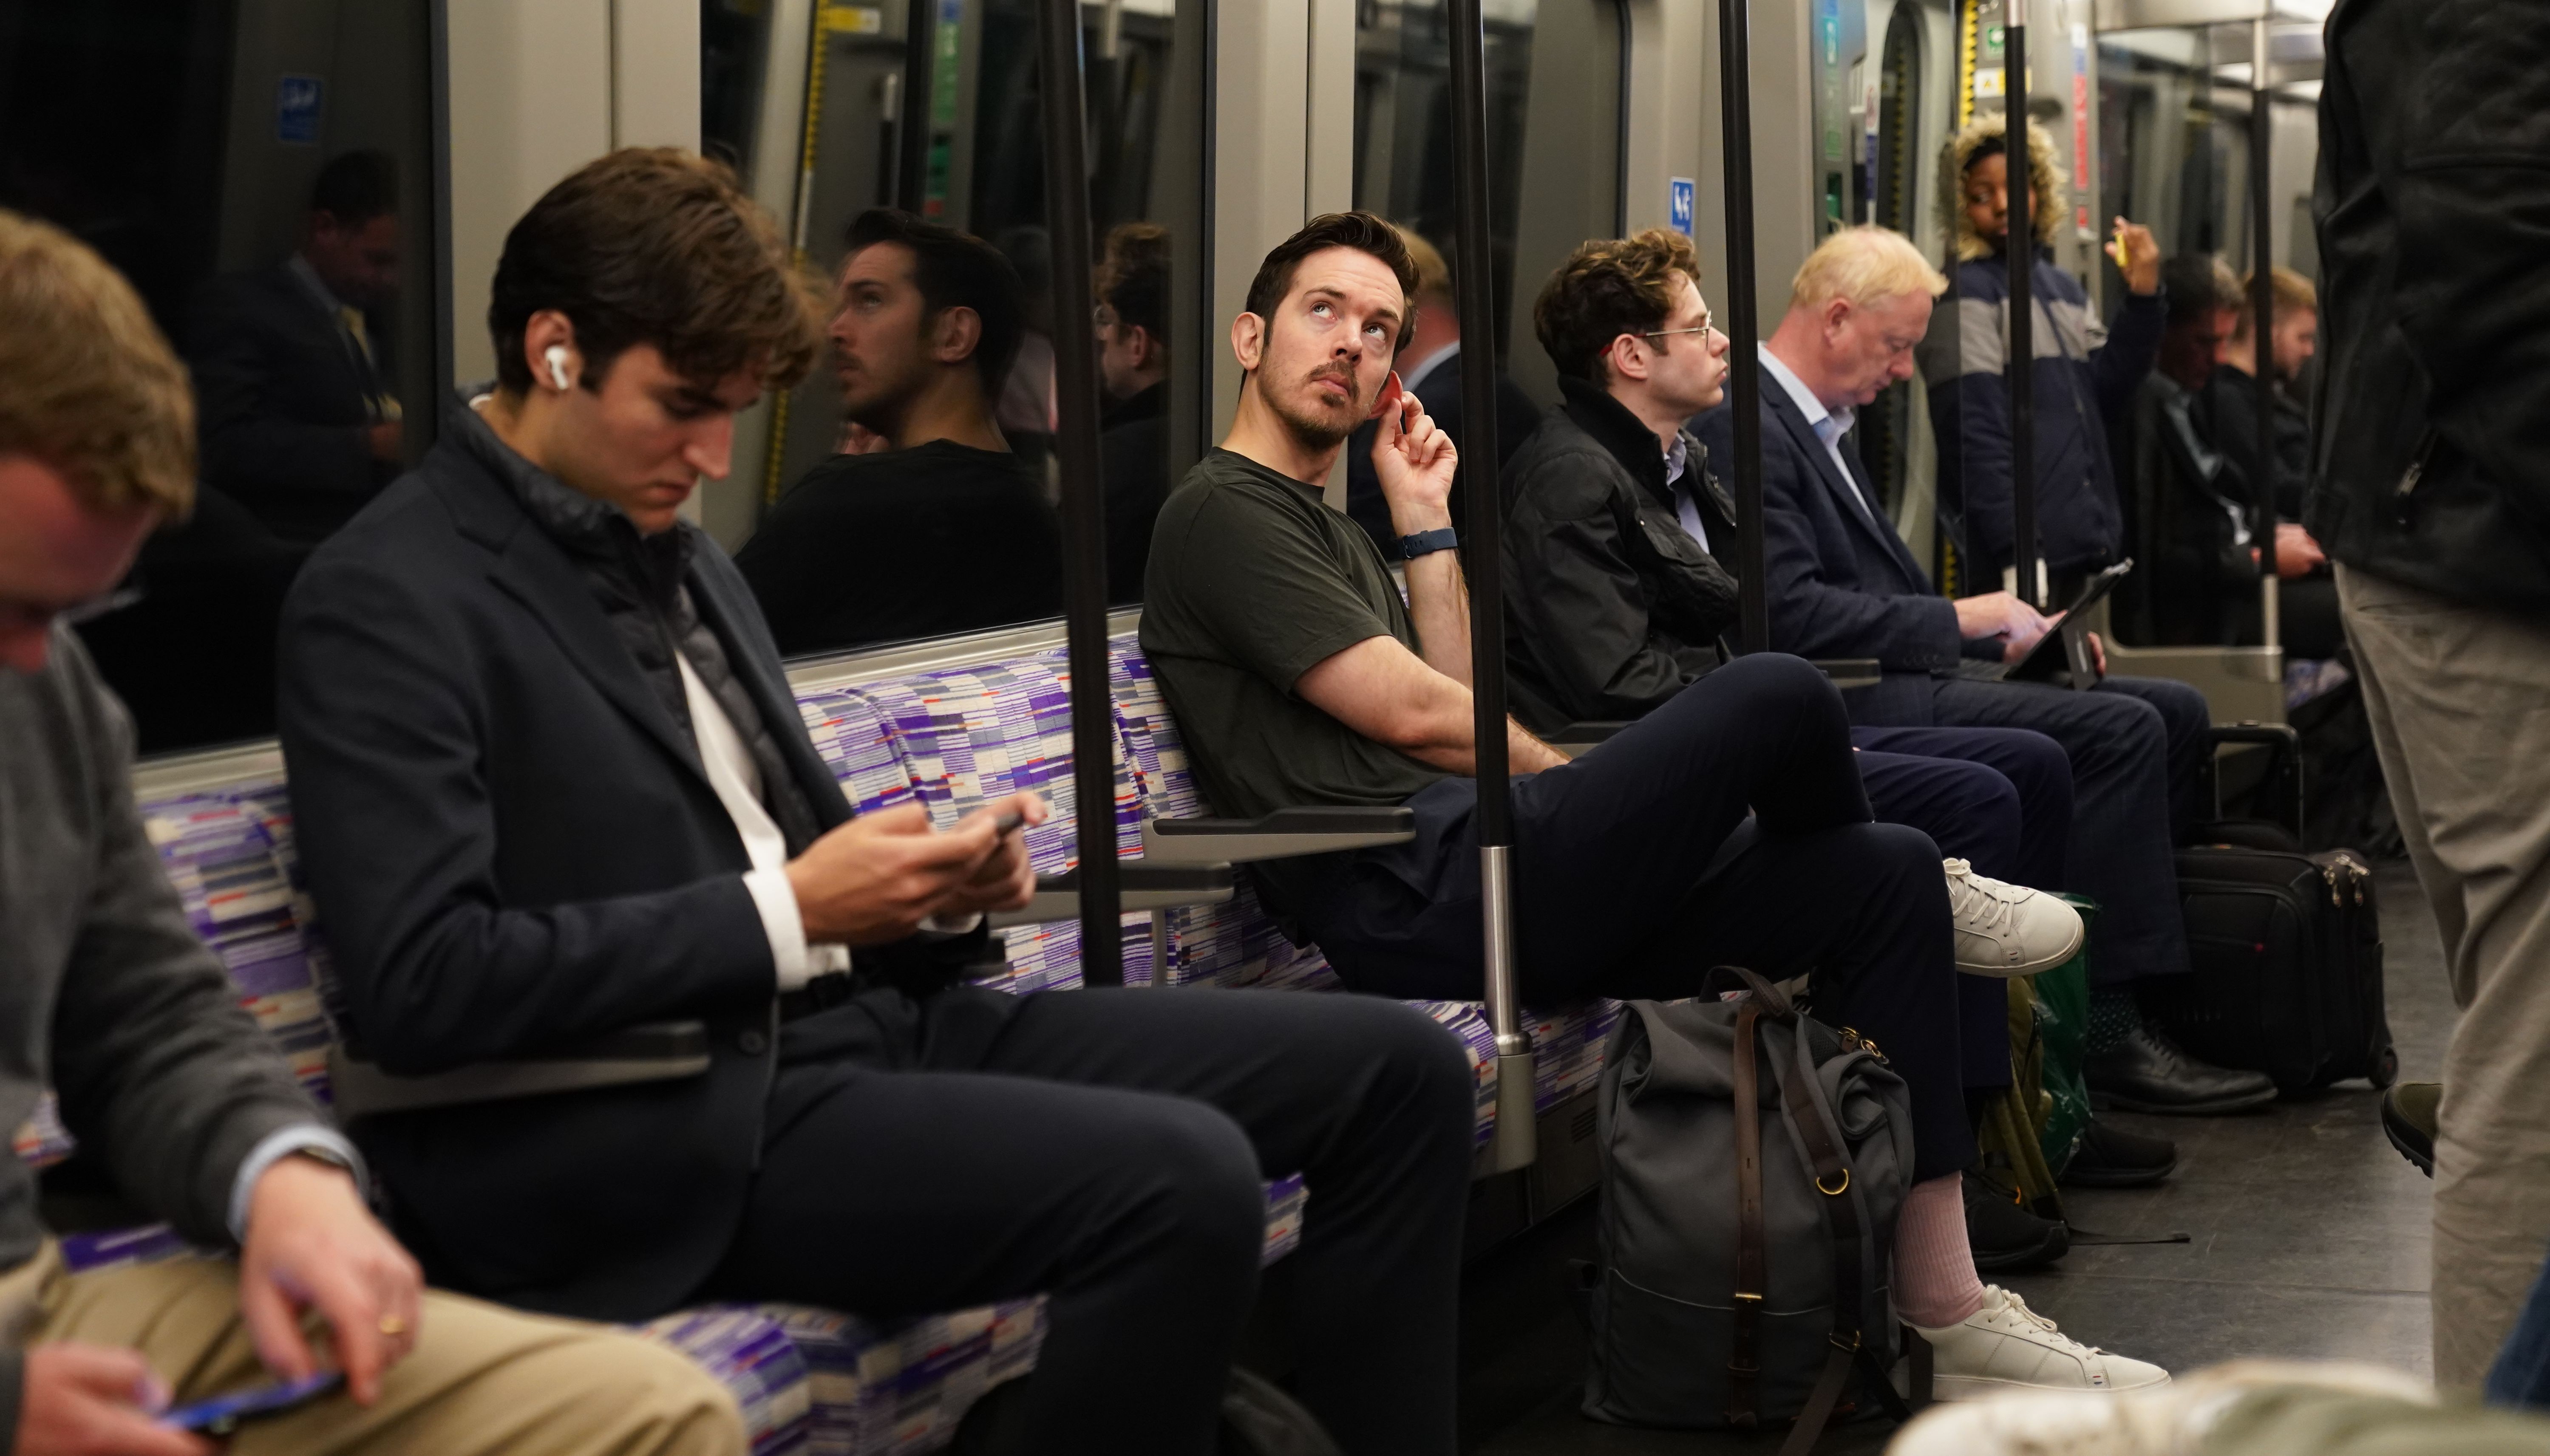 More than a million journeys have been made on the central section of London's 18.9 billion Elizabeth line railway in the first five days since it opened.